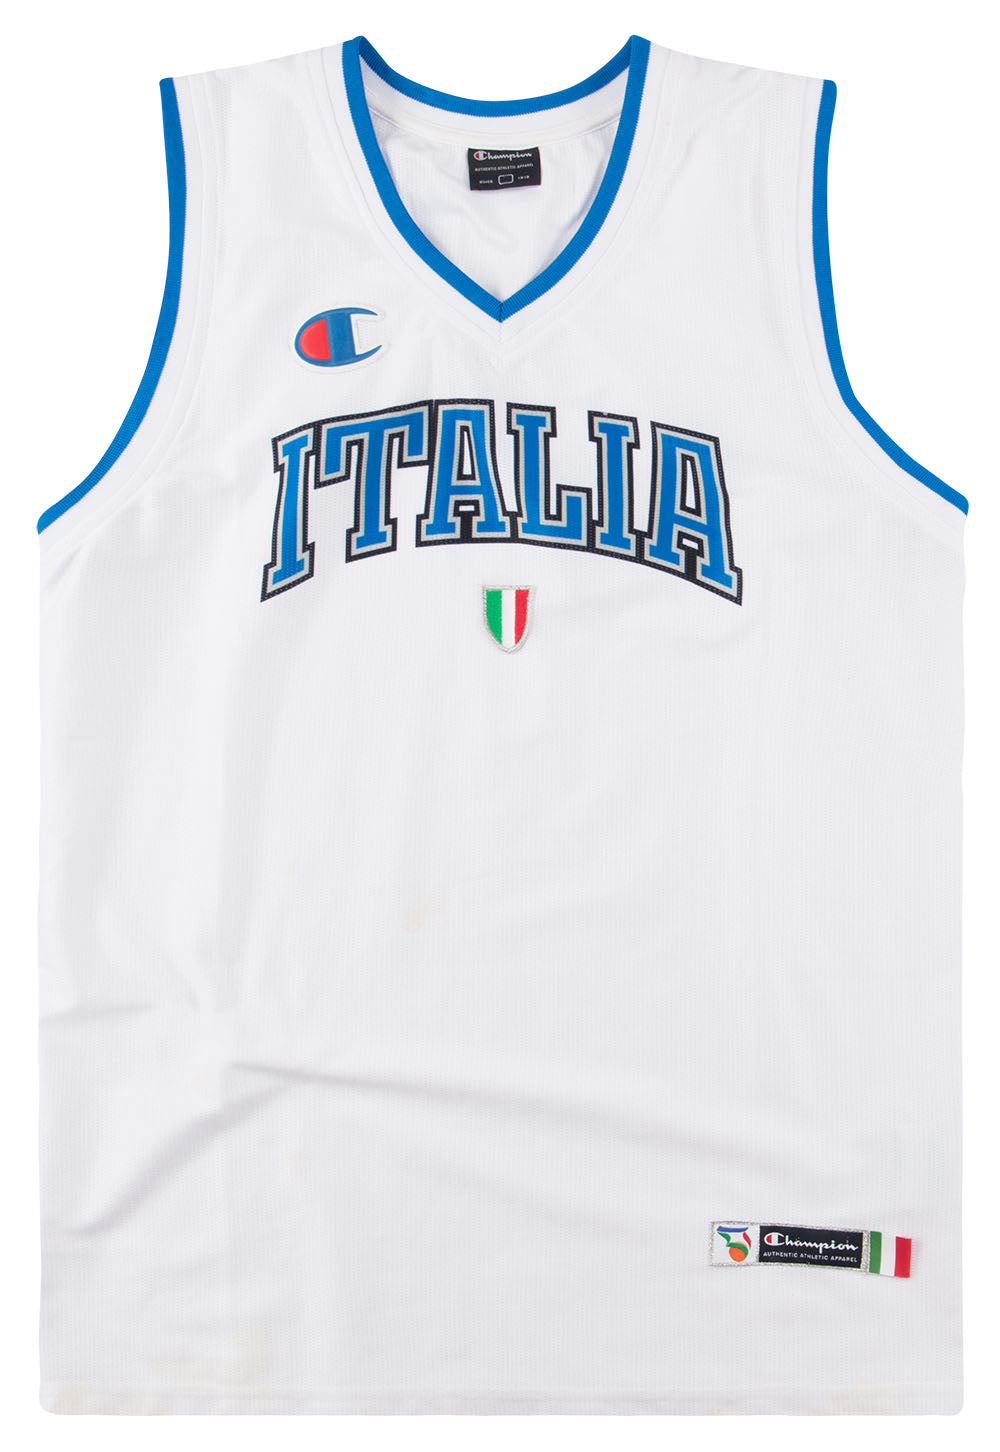 2000's ITALY NATIONAL BASKETBALL TEAM CHAMPION JERSEY (HOME) S